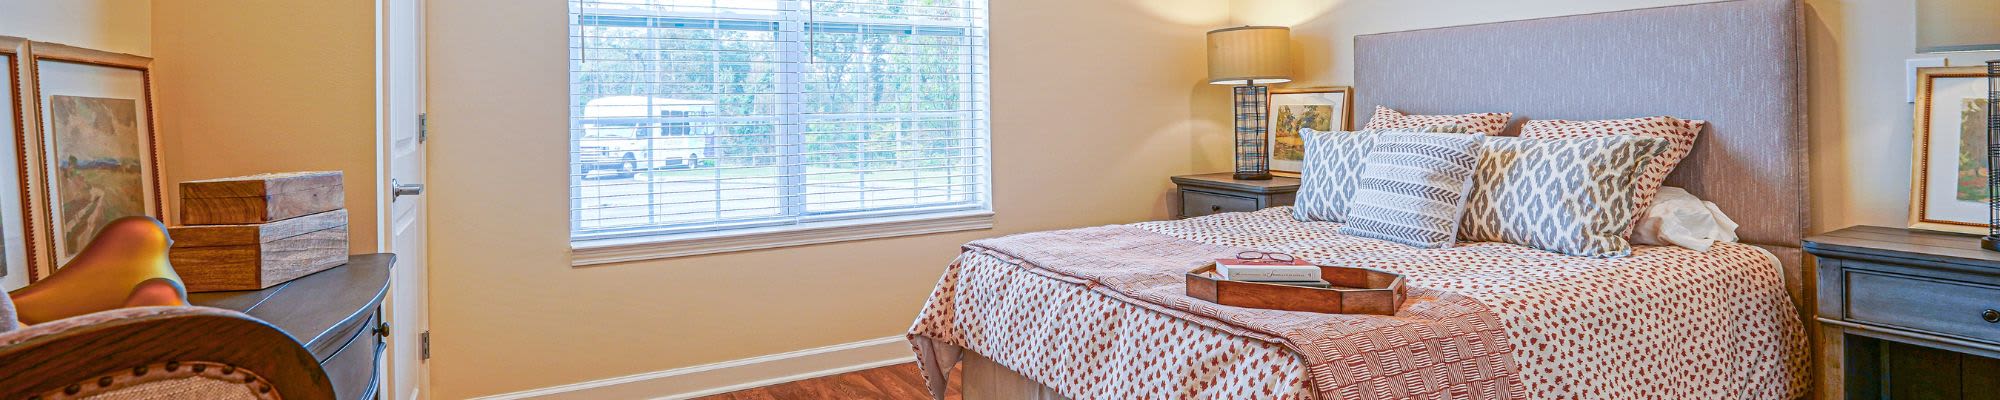 Independent Living at The Harmony Collection at Roanoke - Independent Living in Roanoke, Virginia